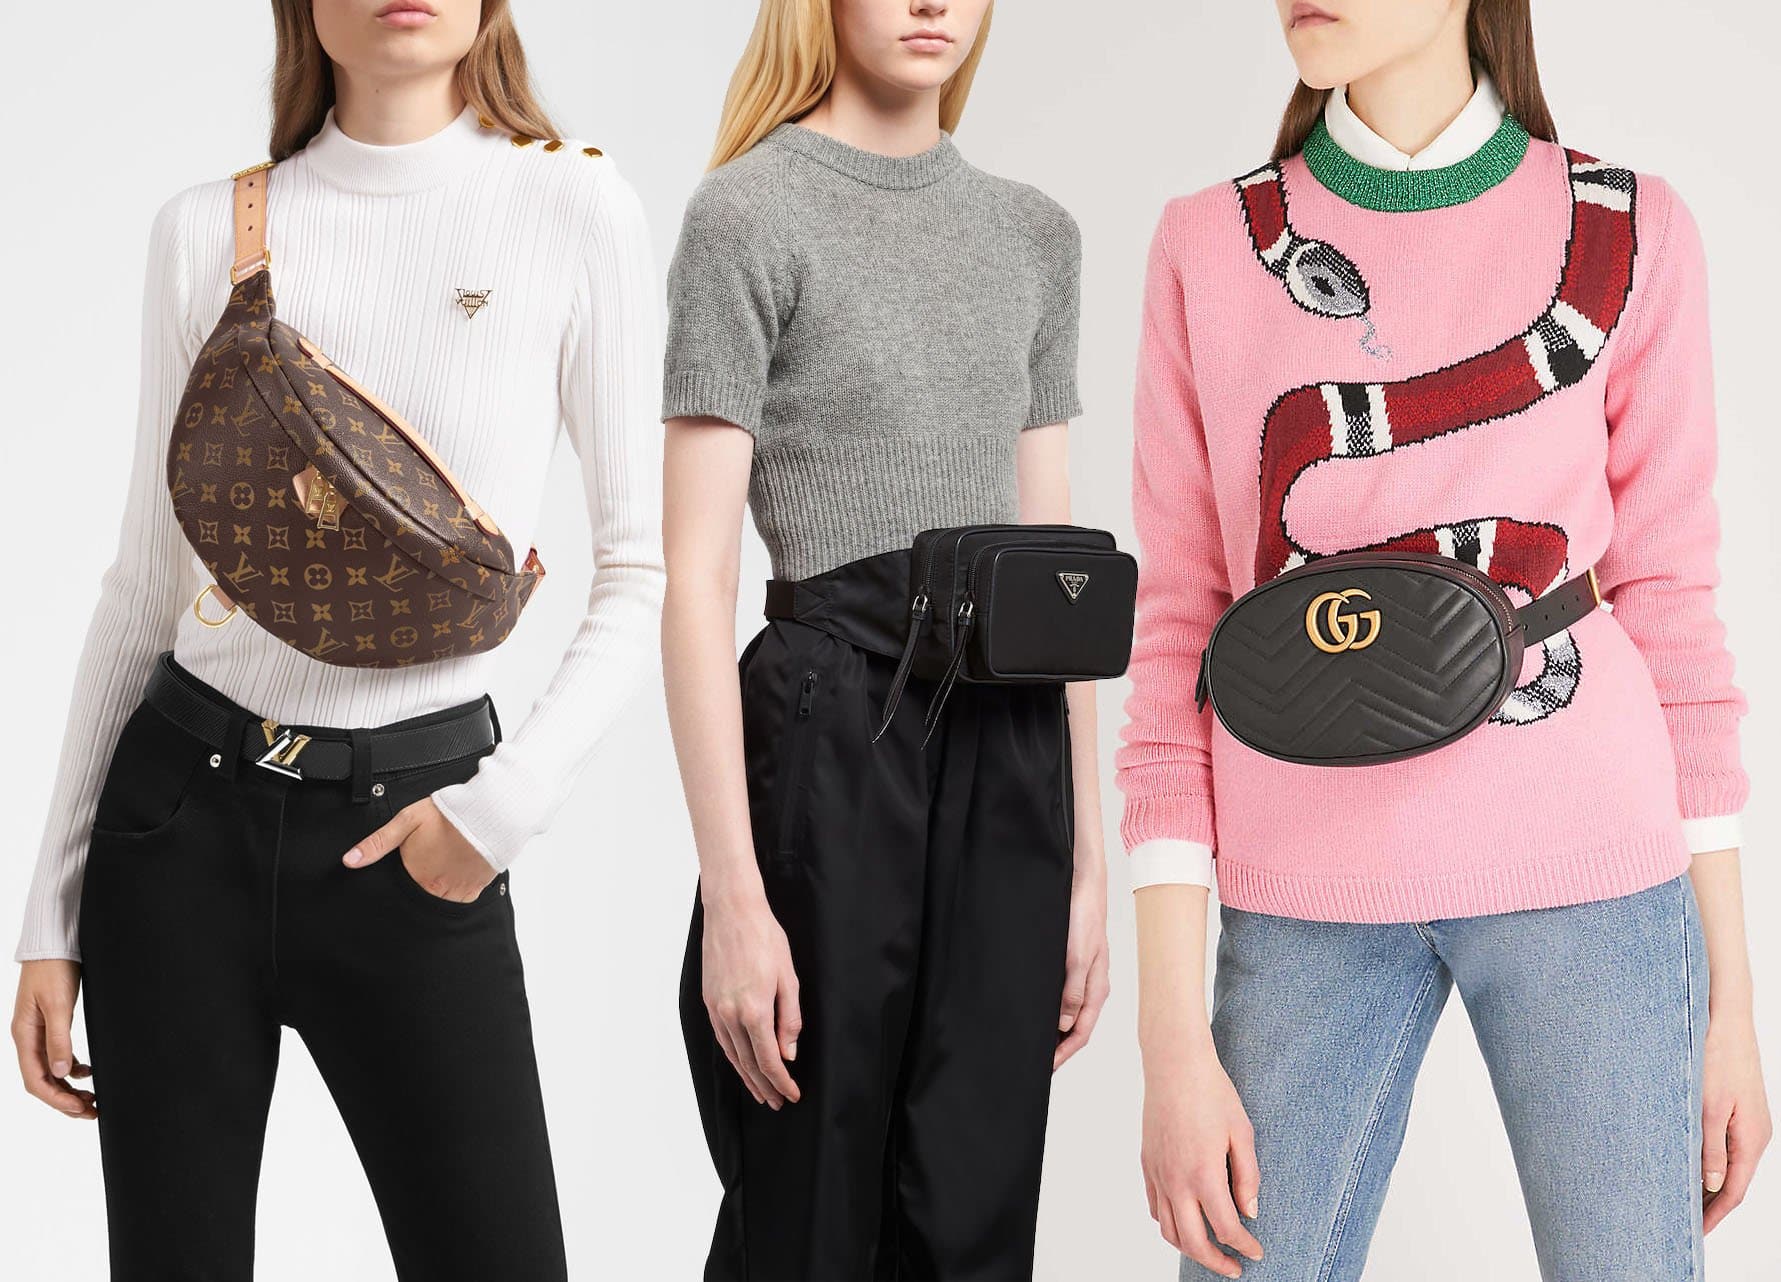 High-fashion brands like Louis Vuitton, Prada, and Gucci introduced new belt bag silhouettes in 2018